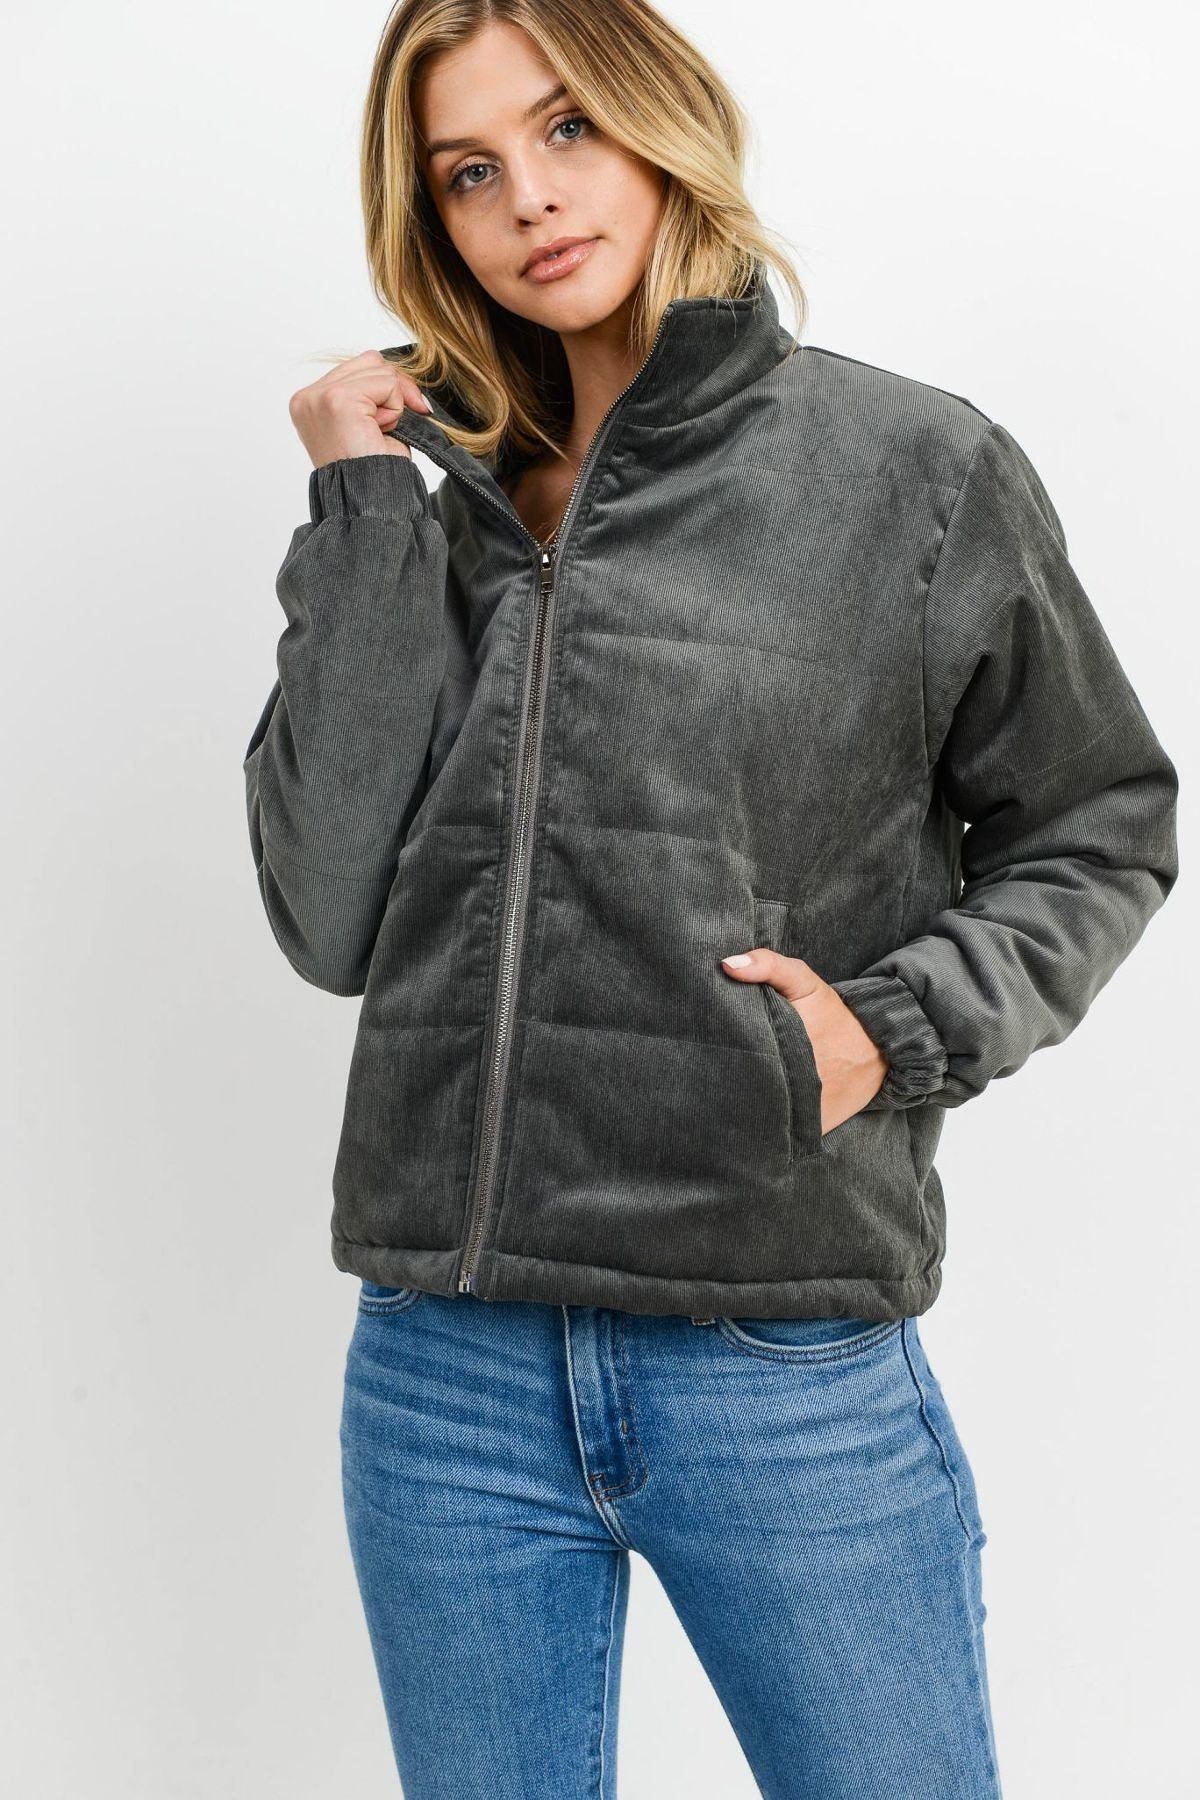 Puffy Long Sleeves Jacket - Love It Clothing